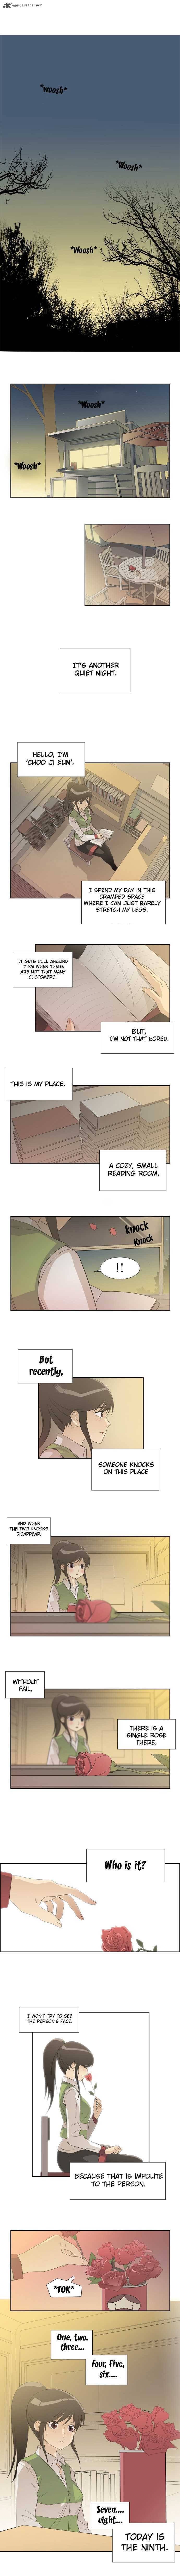 Melo Holic Chapter 8 Page 1